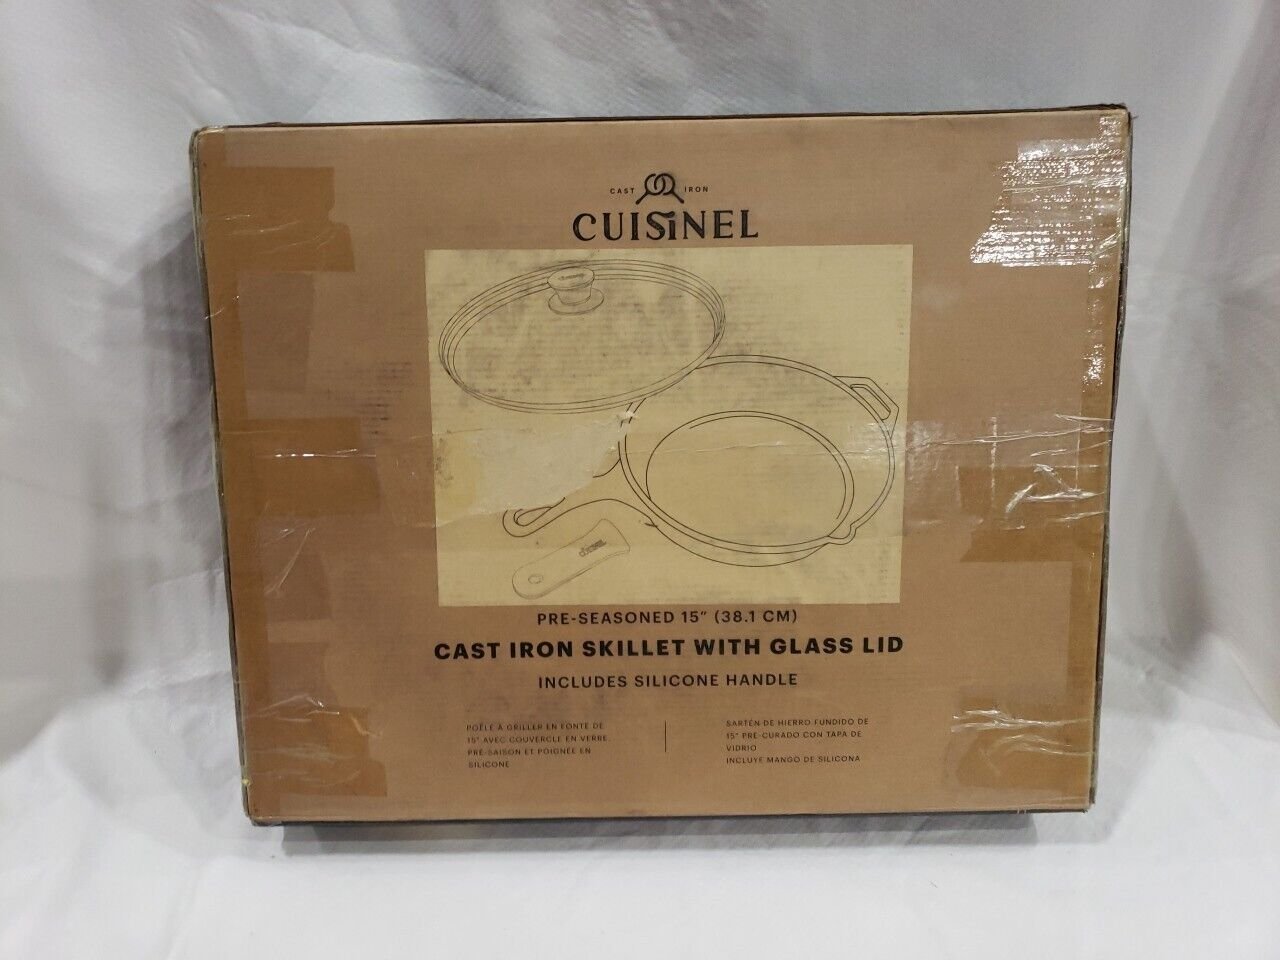 Cuisinel Pre Seasoned 15" Iron Skillet With Glass Lid.